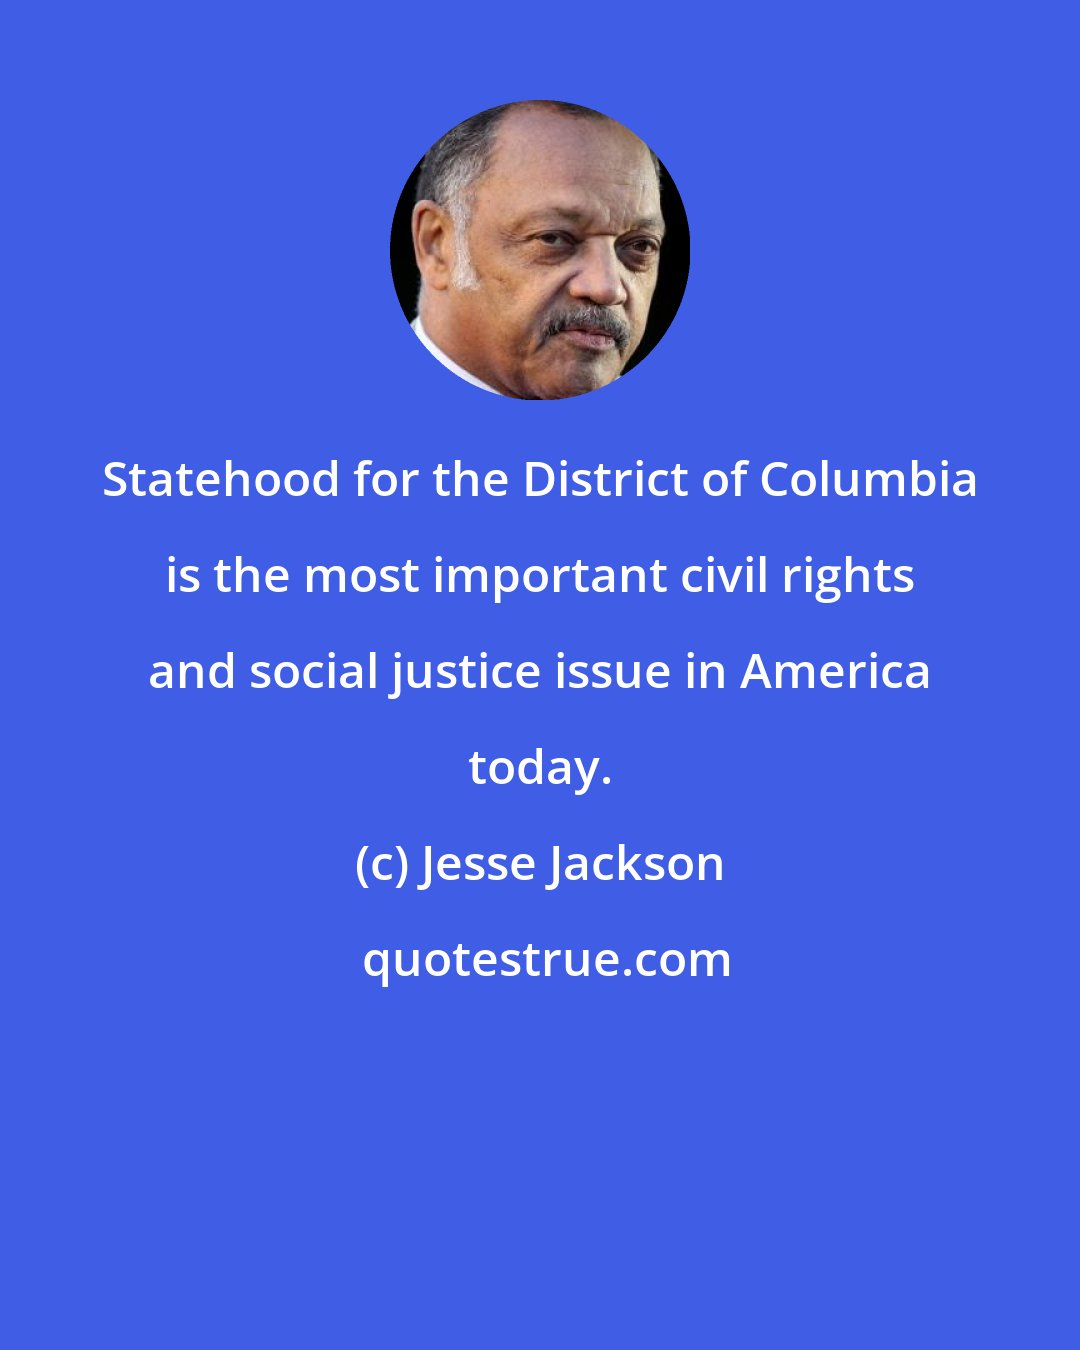 Jesse Jackson: Statehood for the District of Columbia is the most important civil rights and social justice issue in America today.